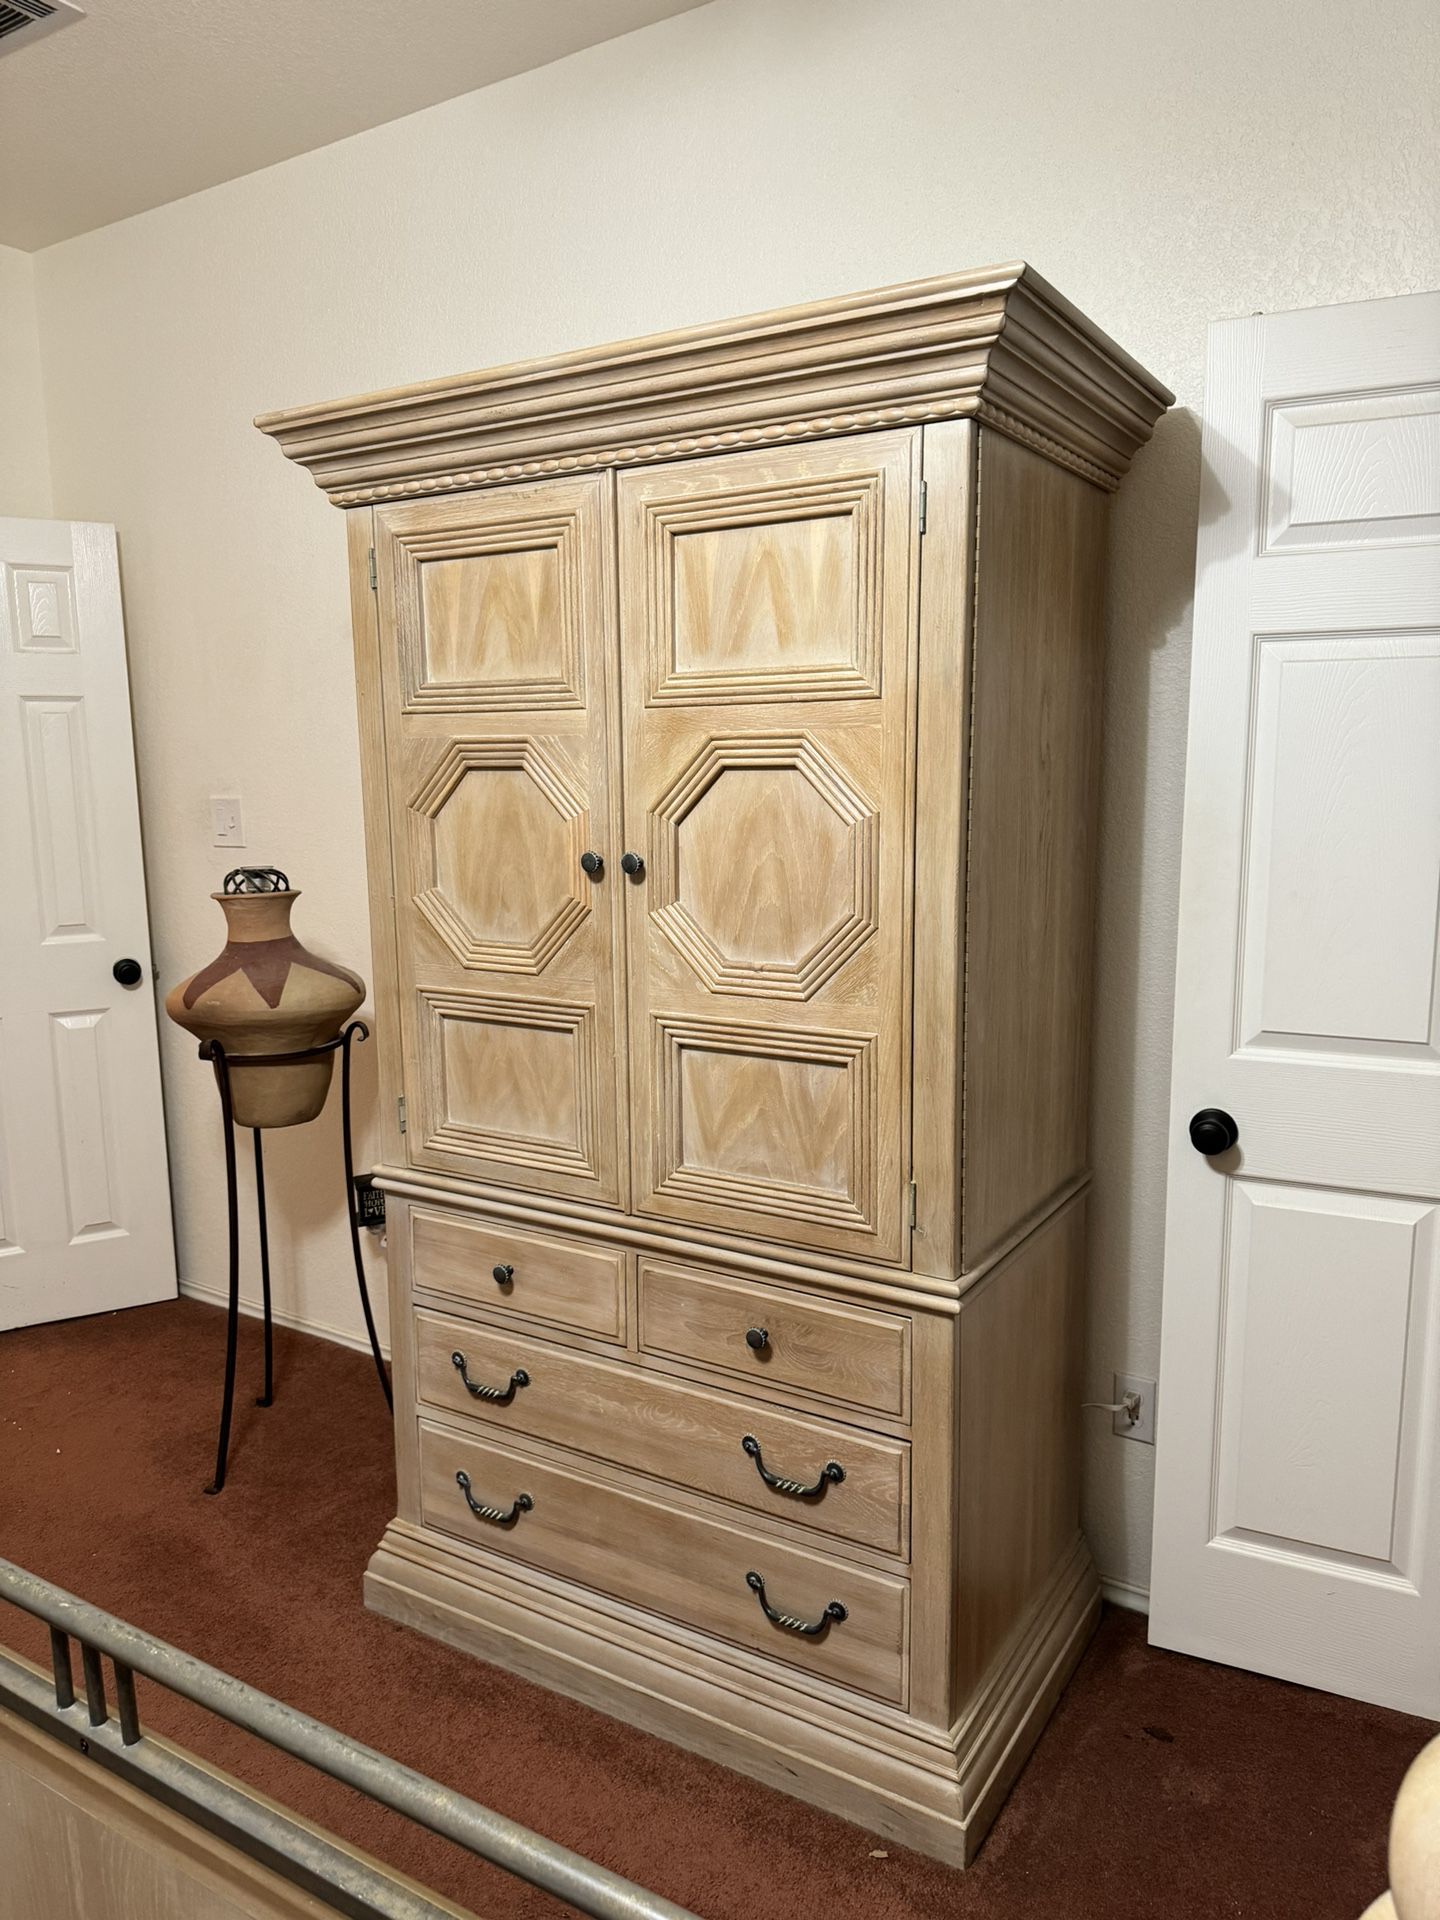 King Bed Frame +Armoire